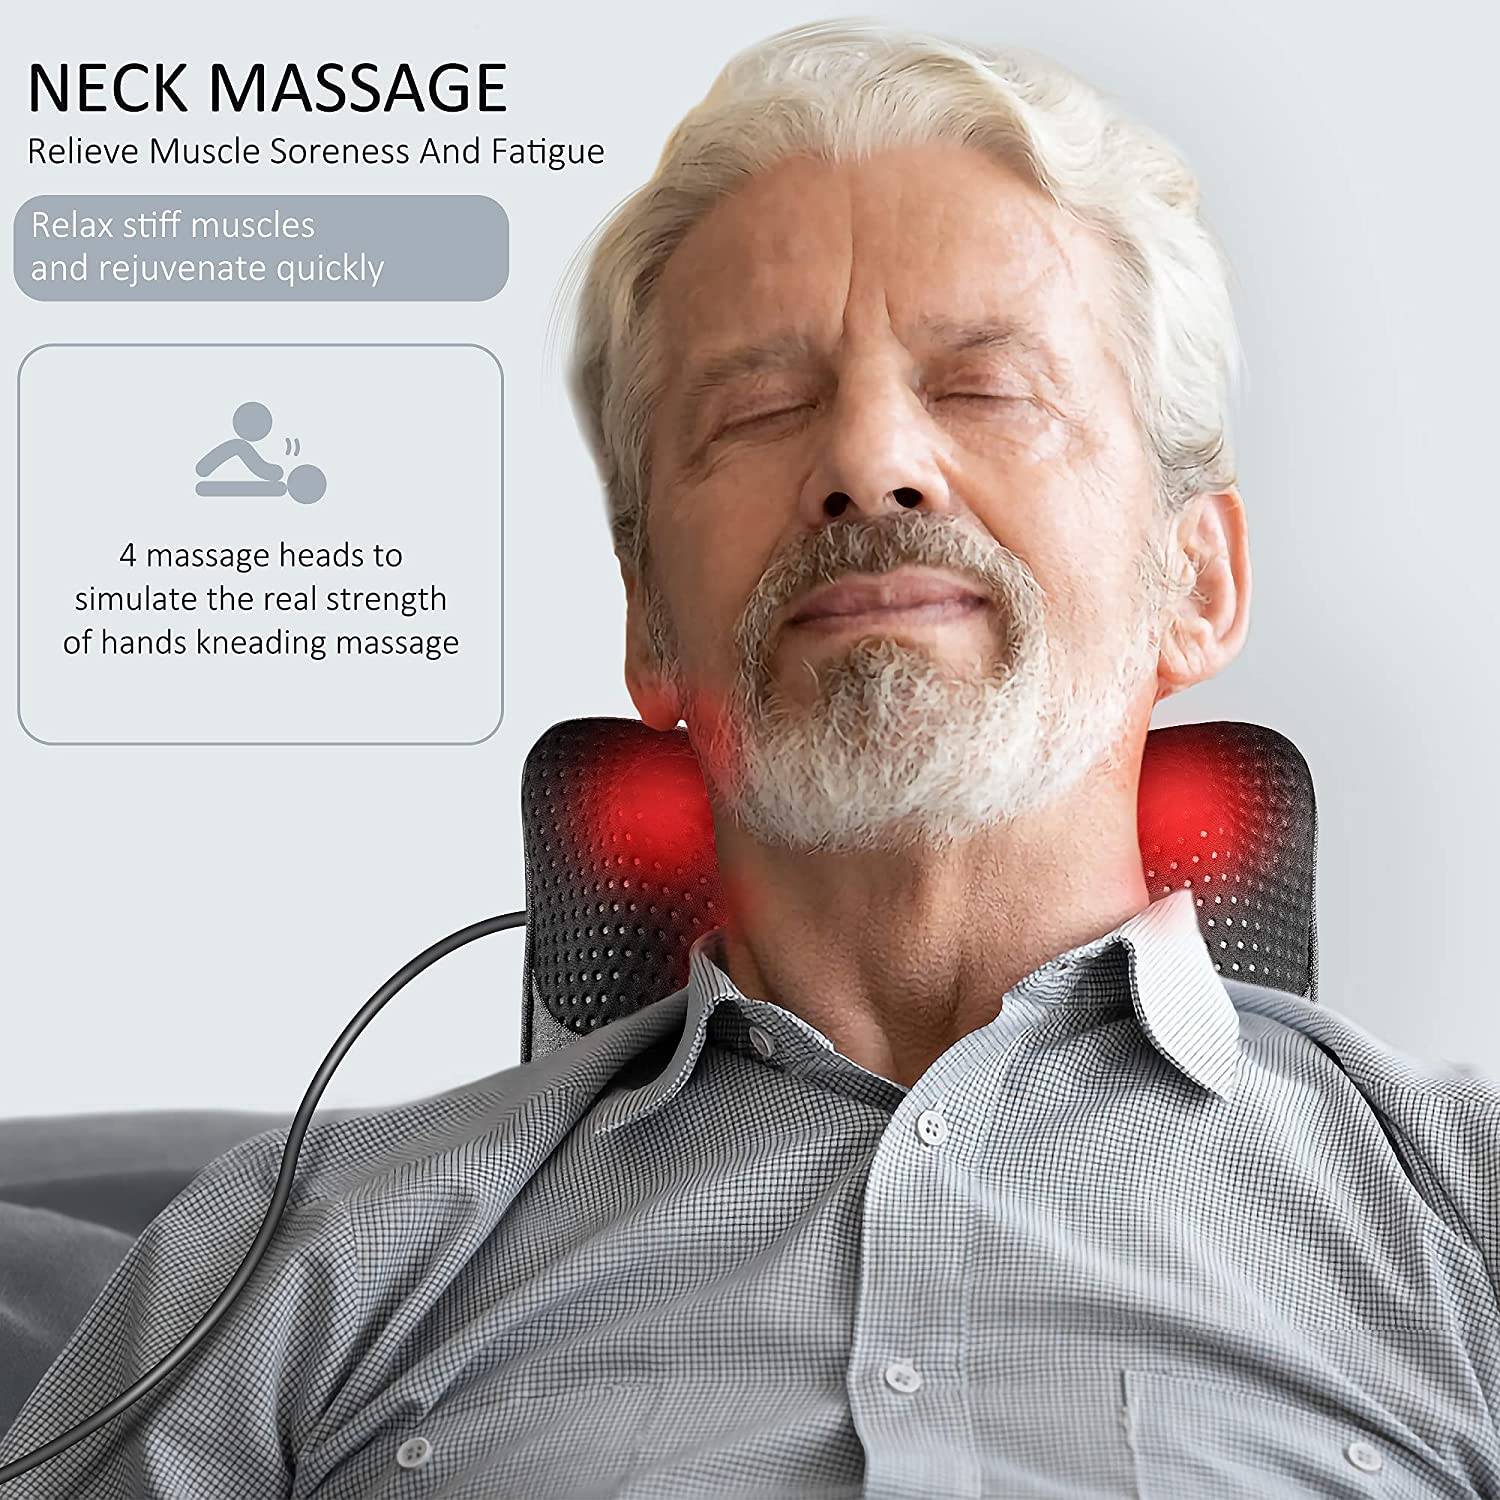 Get relief from neck pain with this massager that has heat to soothe muscles.